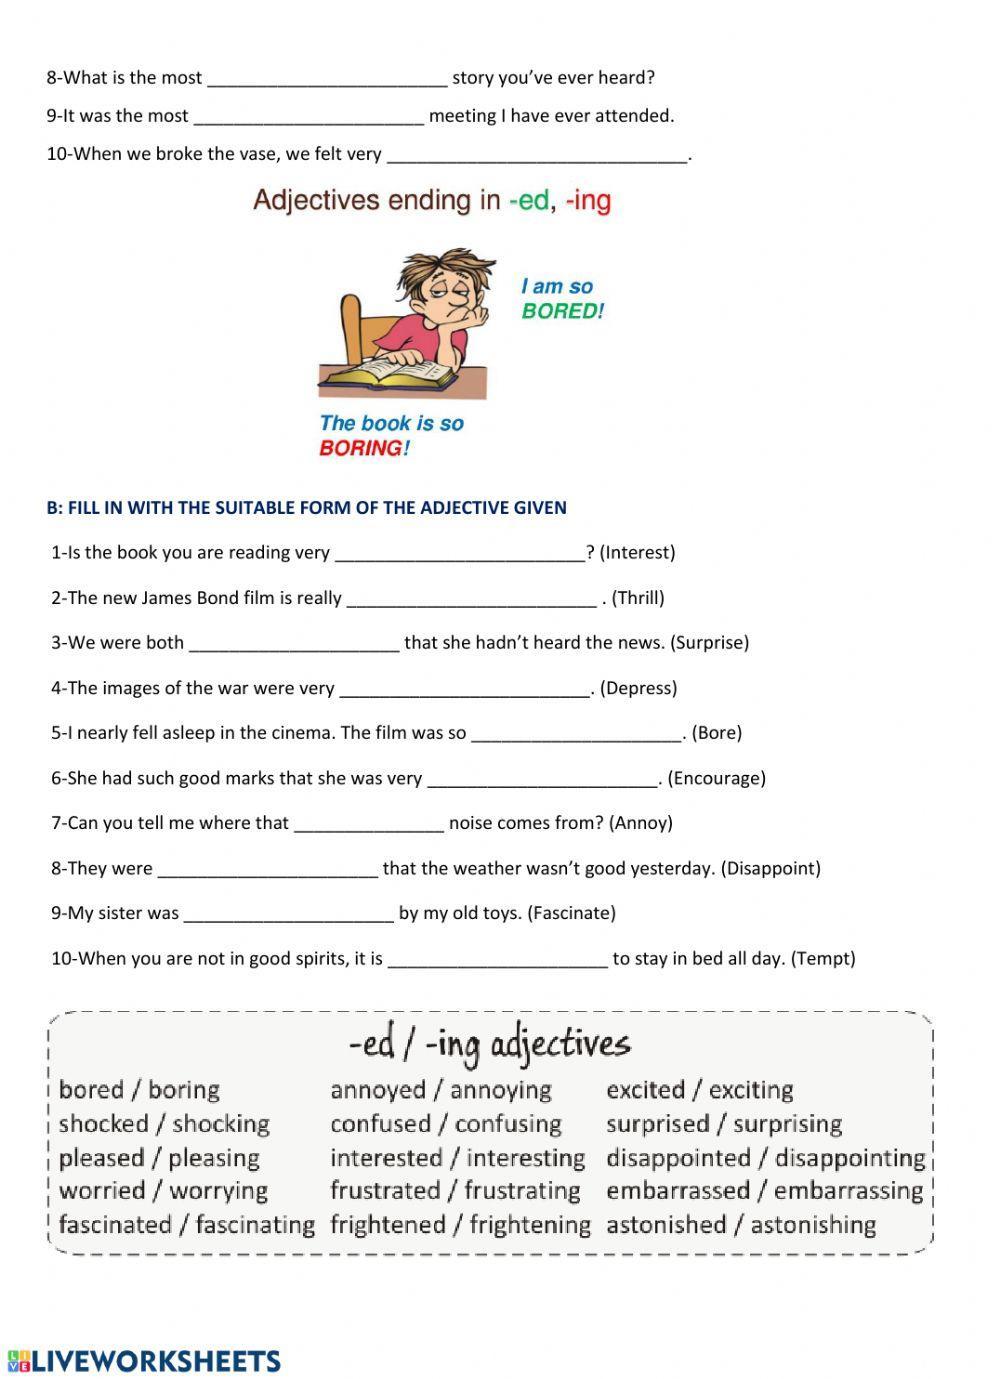 7th ed-ing adjectives